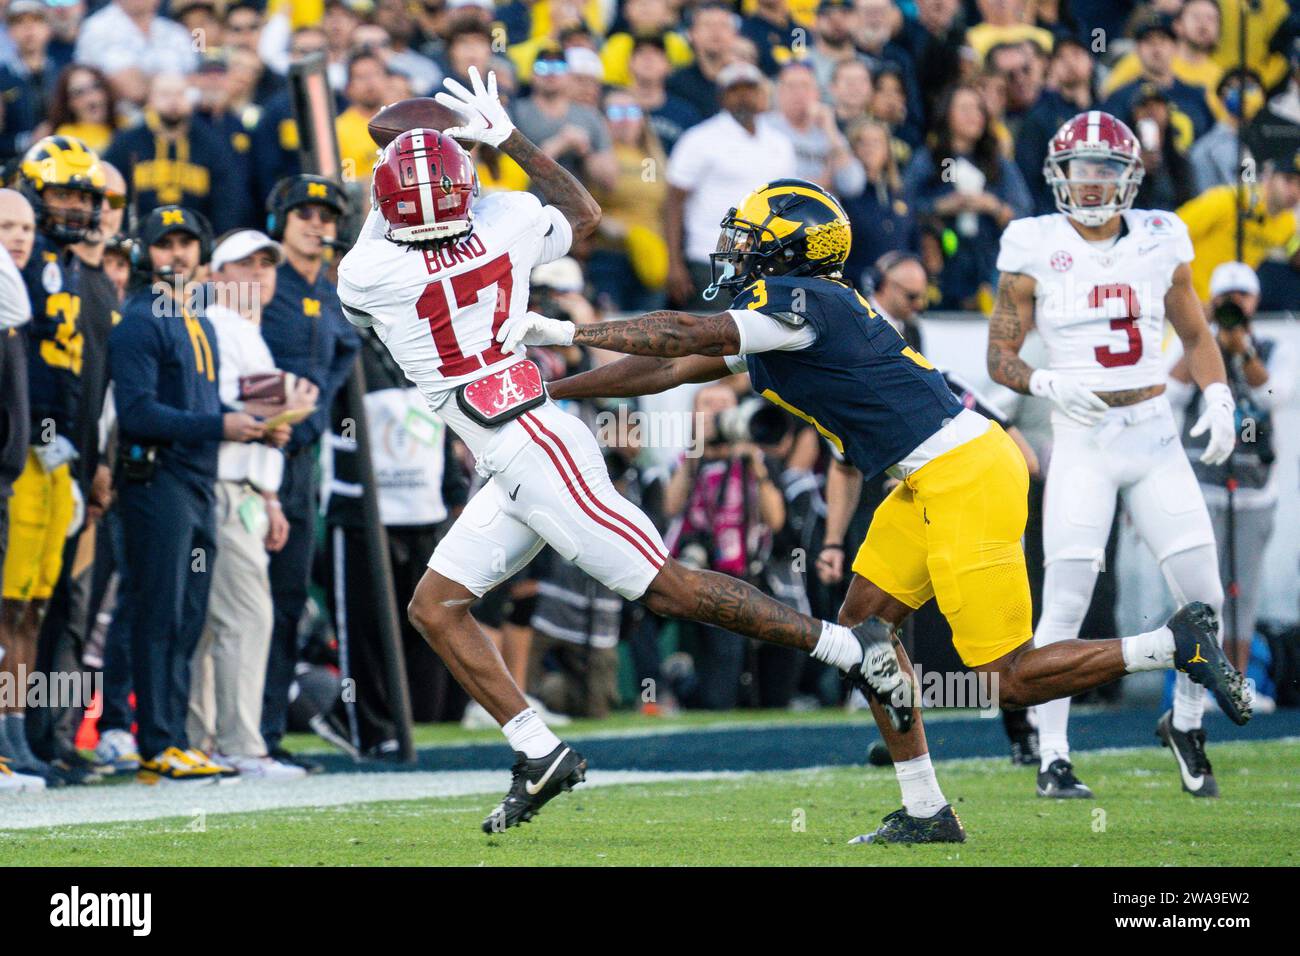 Alabama Crimson Tide wide receiver Isaiah Bond (17) makes a catch against Michigan Wolverines defensive back Keon Sabb (3) during the CFP Semifinal at Stock Photo